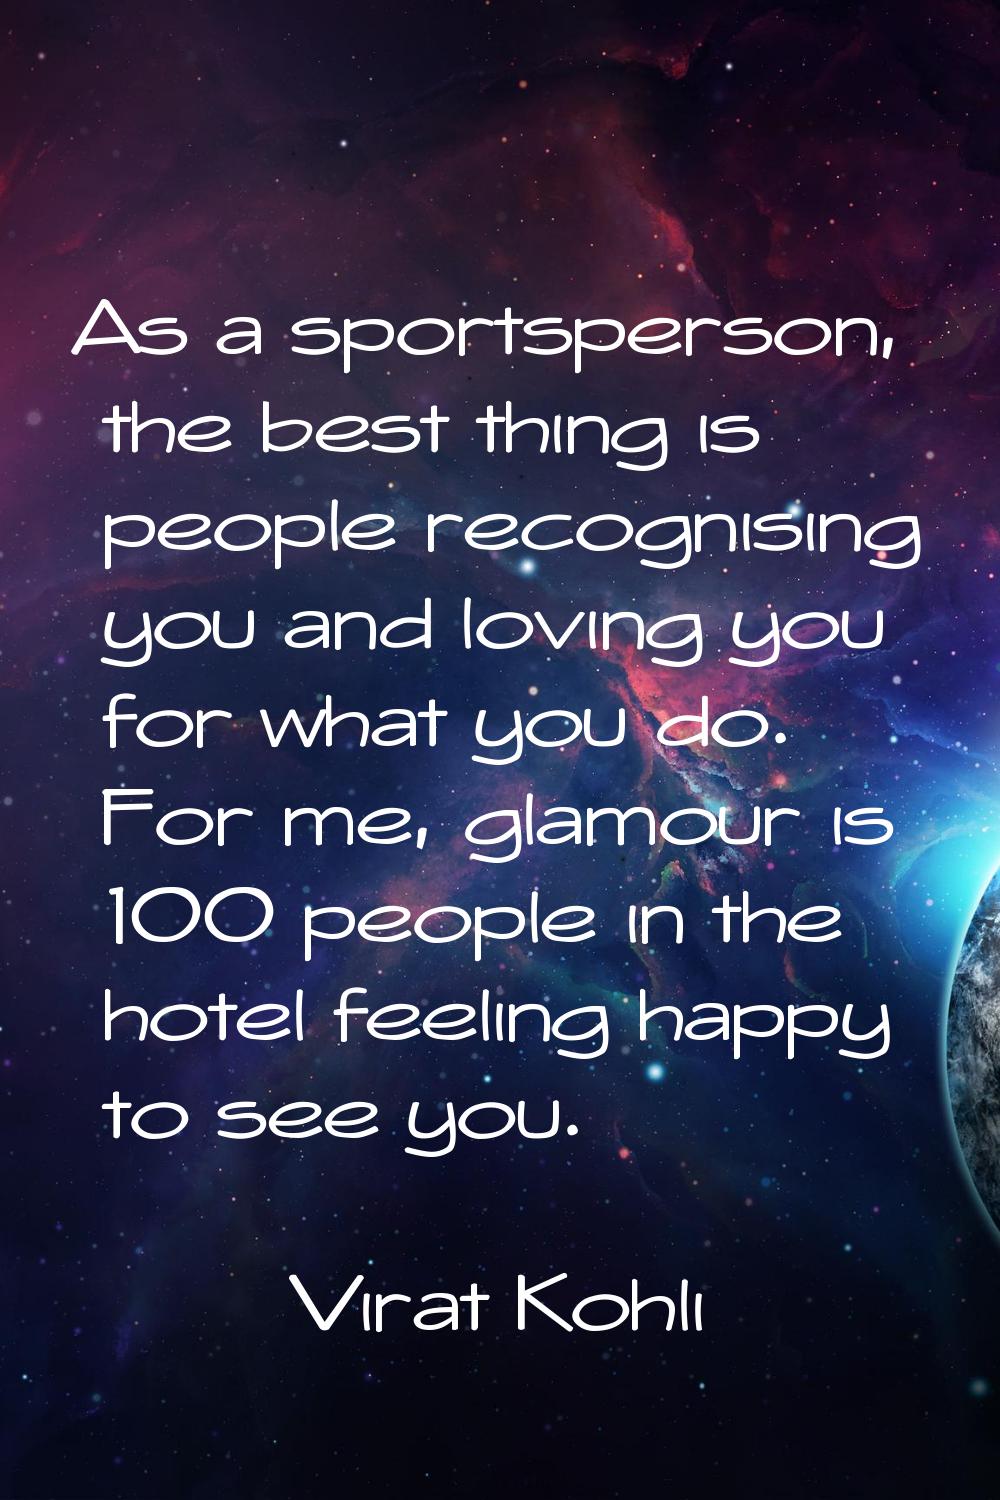 As a sportsperson, the best thing is people recognising you and loving you for what you do. For me,